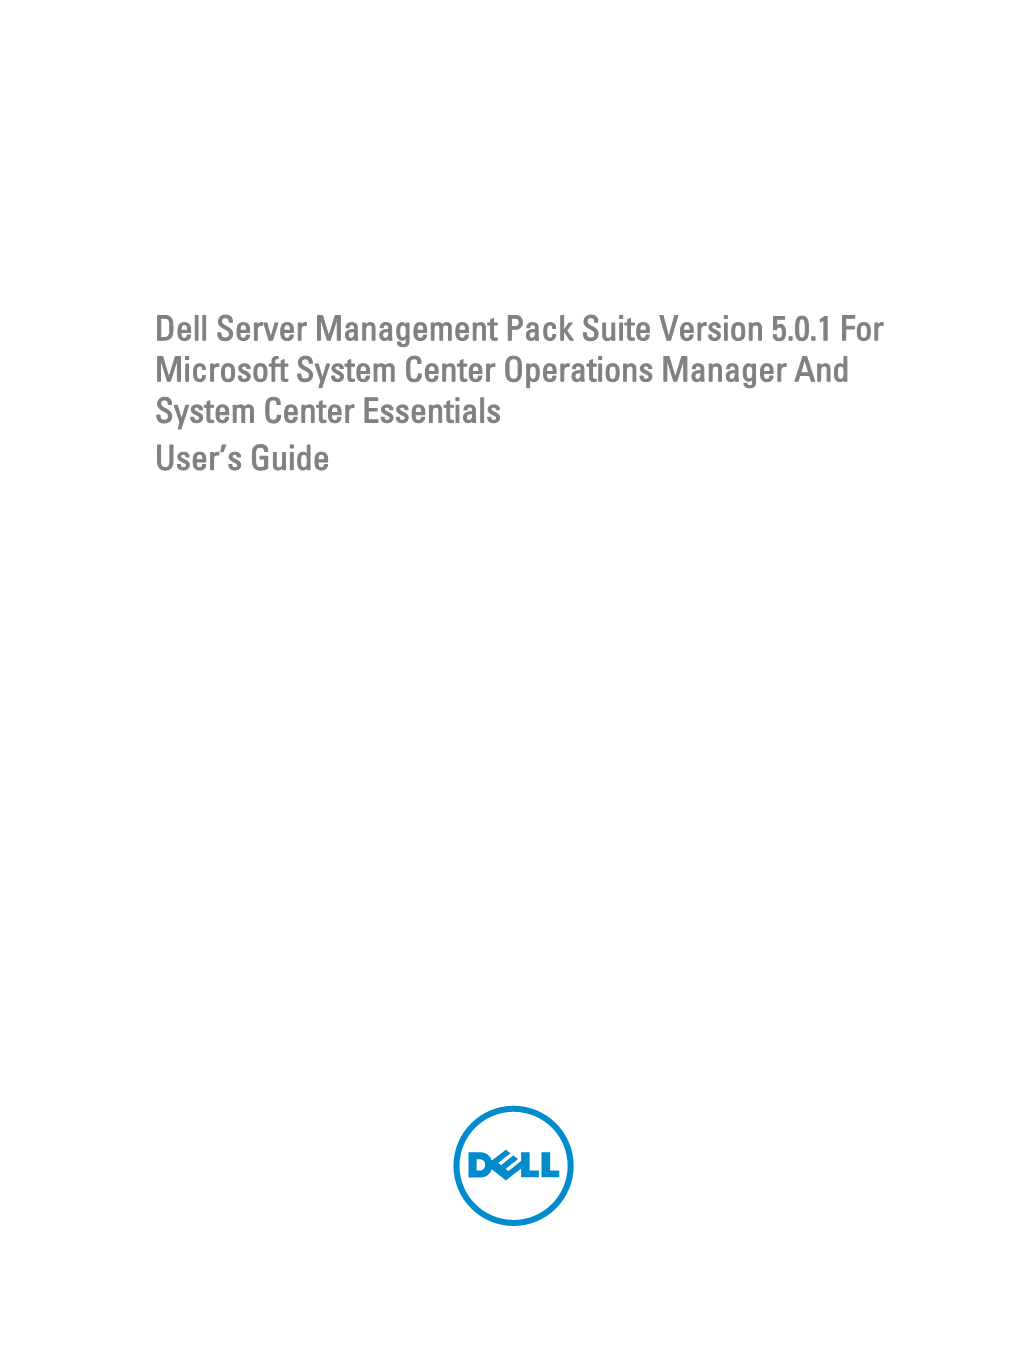 Dell Server Management Pack Suite Version 5.0.1 for Microsoft System Center Operations Manager and System Center Essentials User’S Guide Notes, Cautions, and Warnings